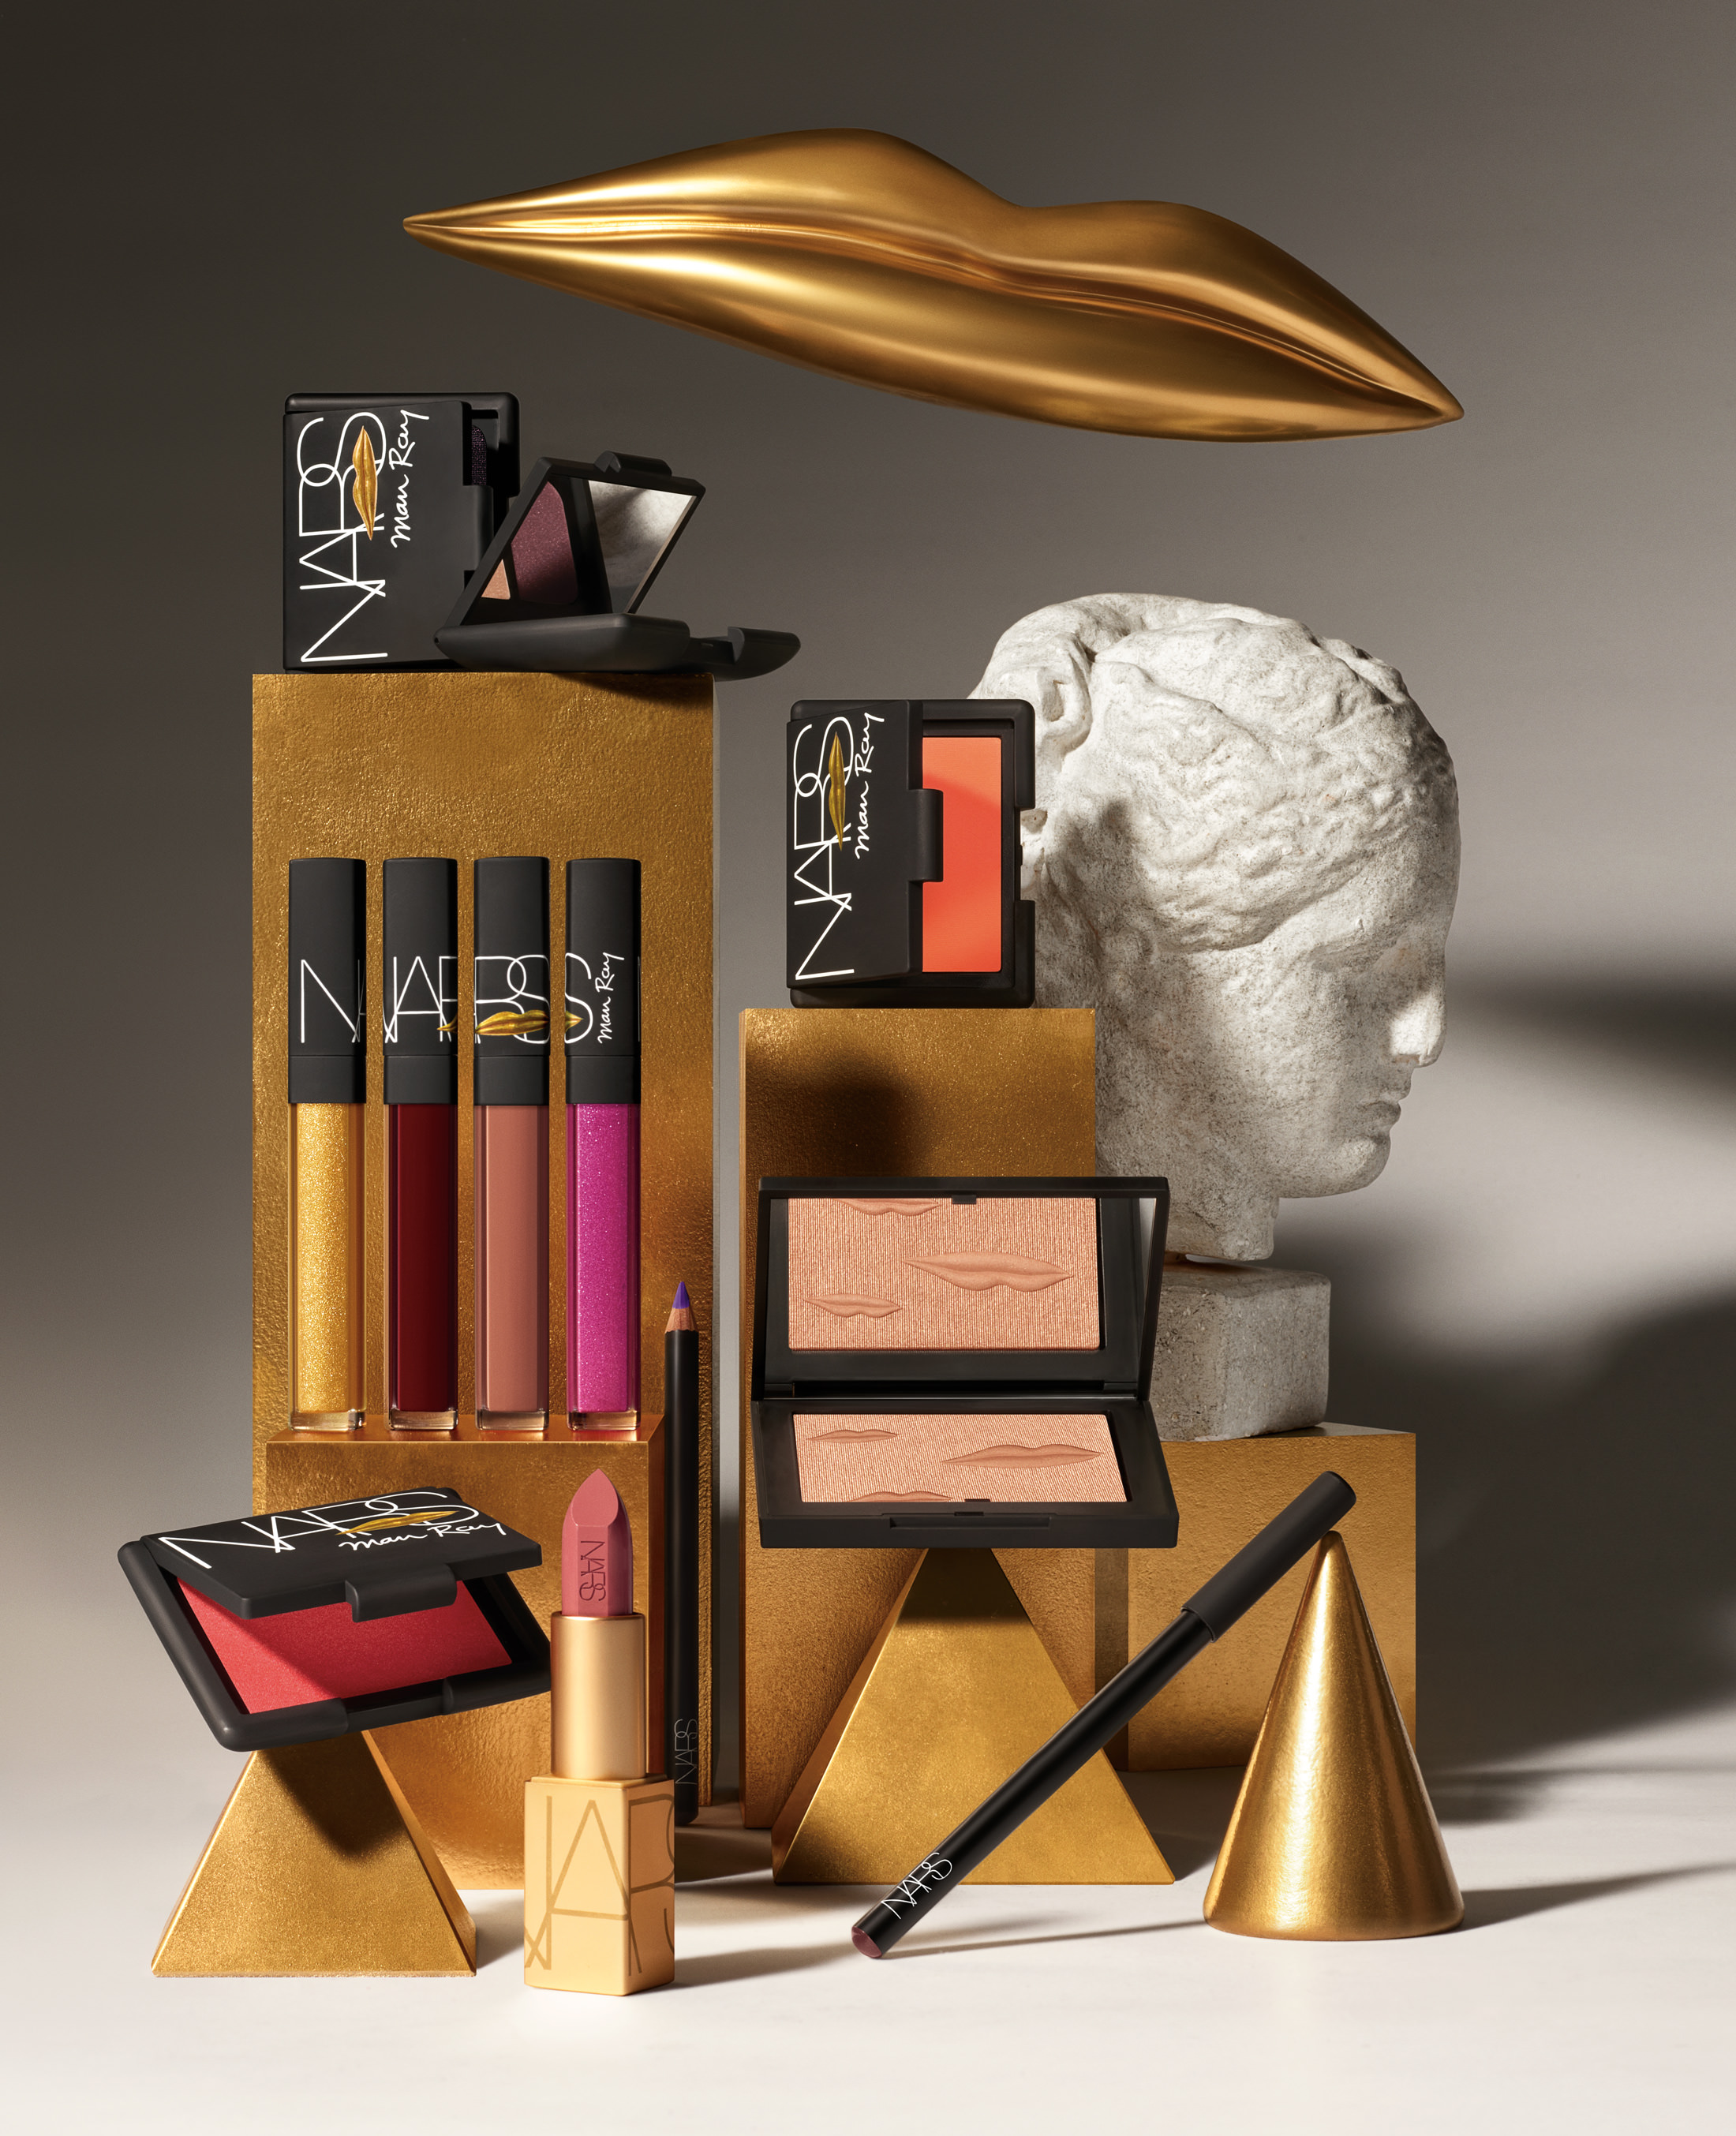 Man Ray for Nars Holiday Collection